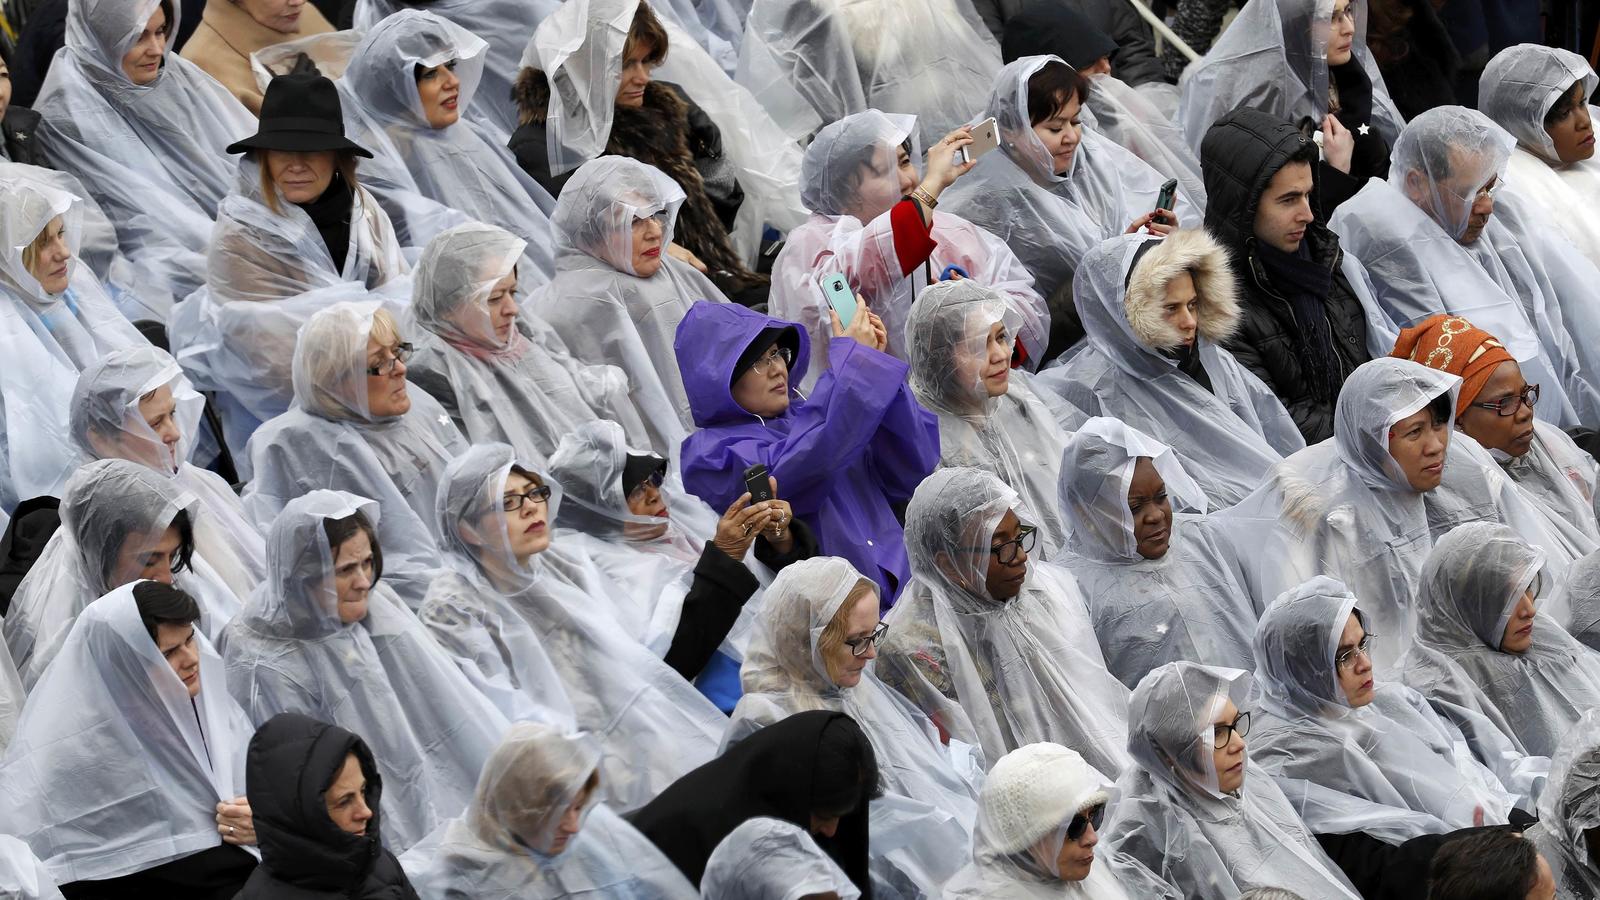 Spectators protect themselves from the rain during the inauguration ceremonies to swear in Donald Trump as the 45th president of the United States at the U.S. Capitol in Washington, U.S., January 20, 2017. REUTERS/Kevin Lamarque